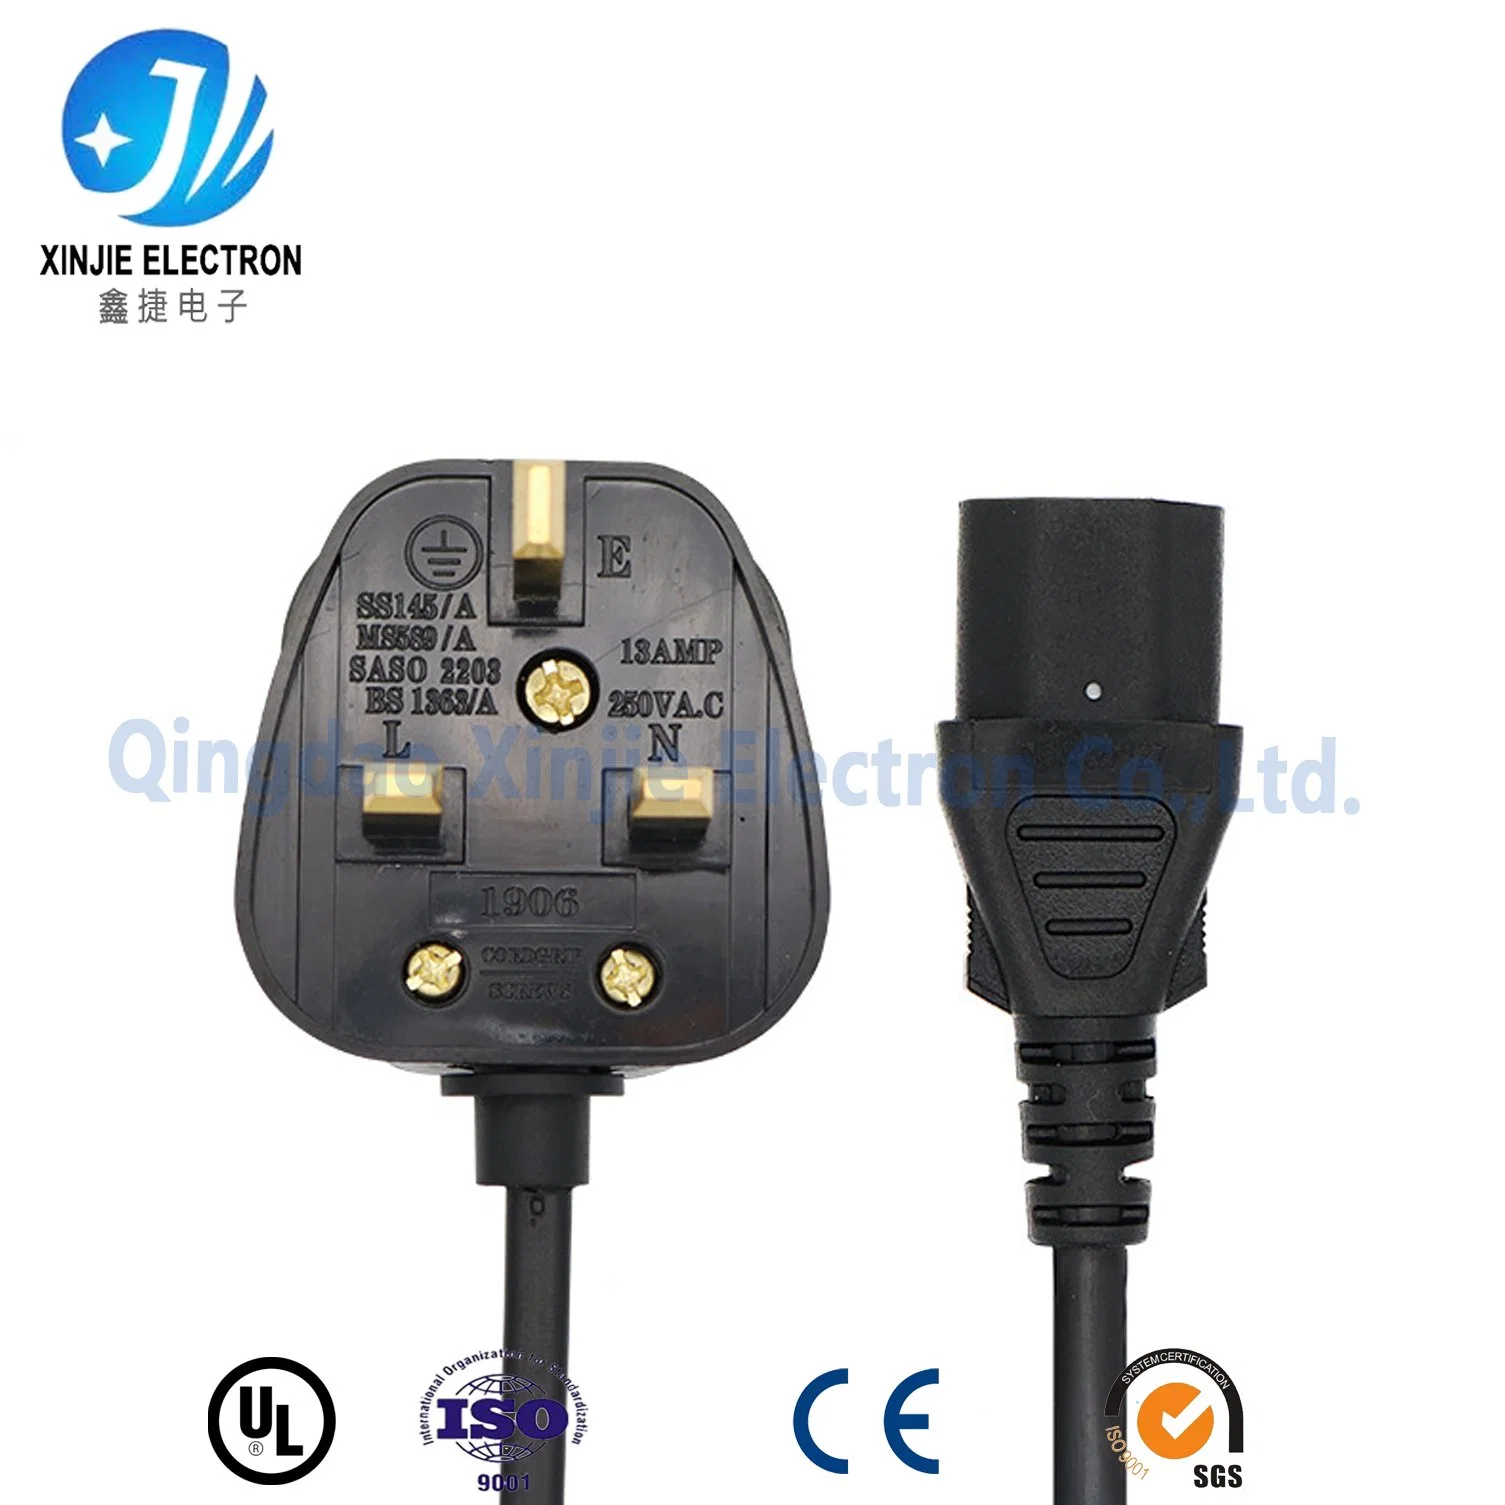 Electric Power Cord for Electric Blender, Juicer, Grinder of Small Home Appliance